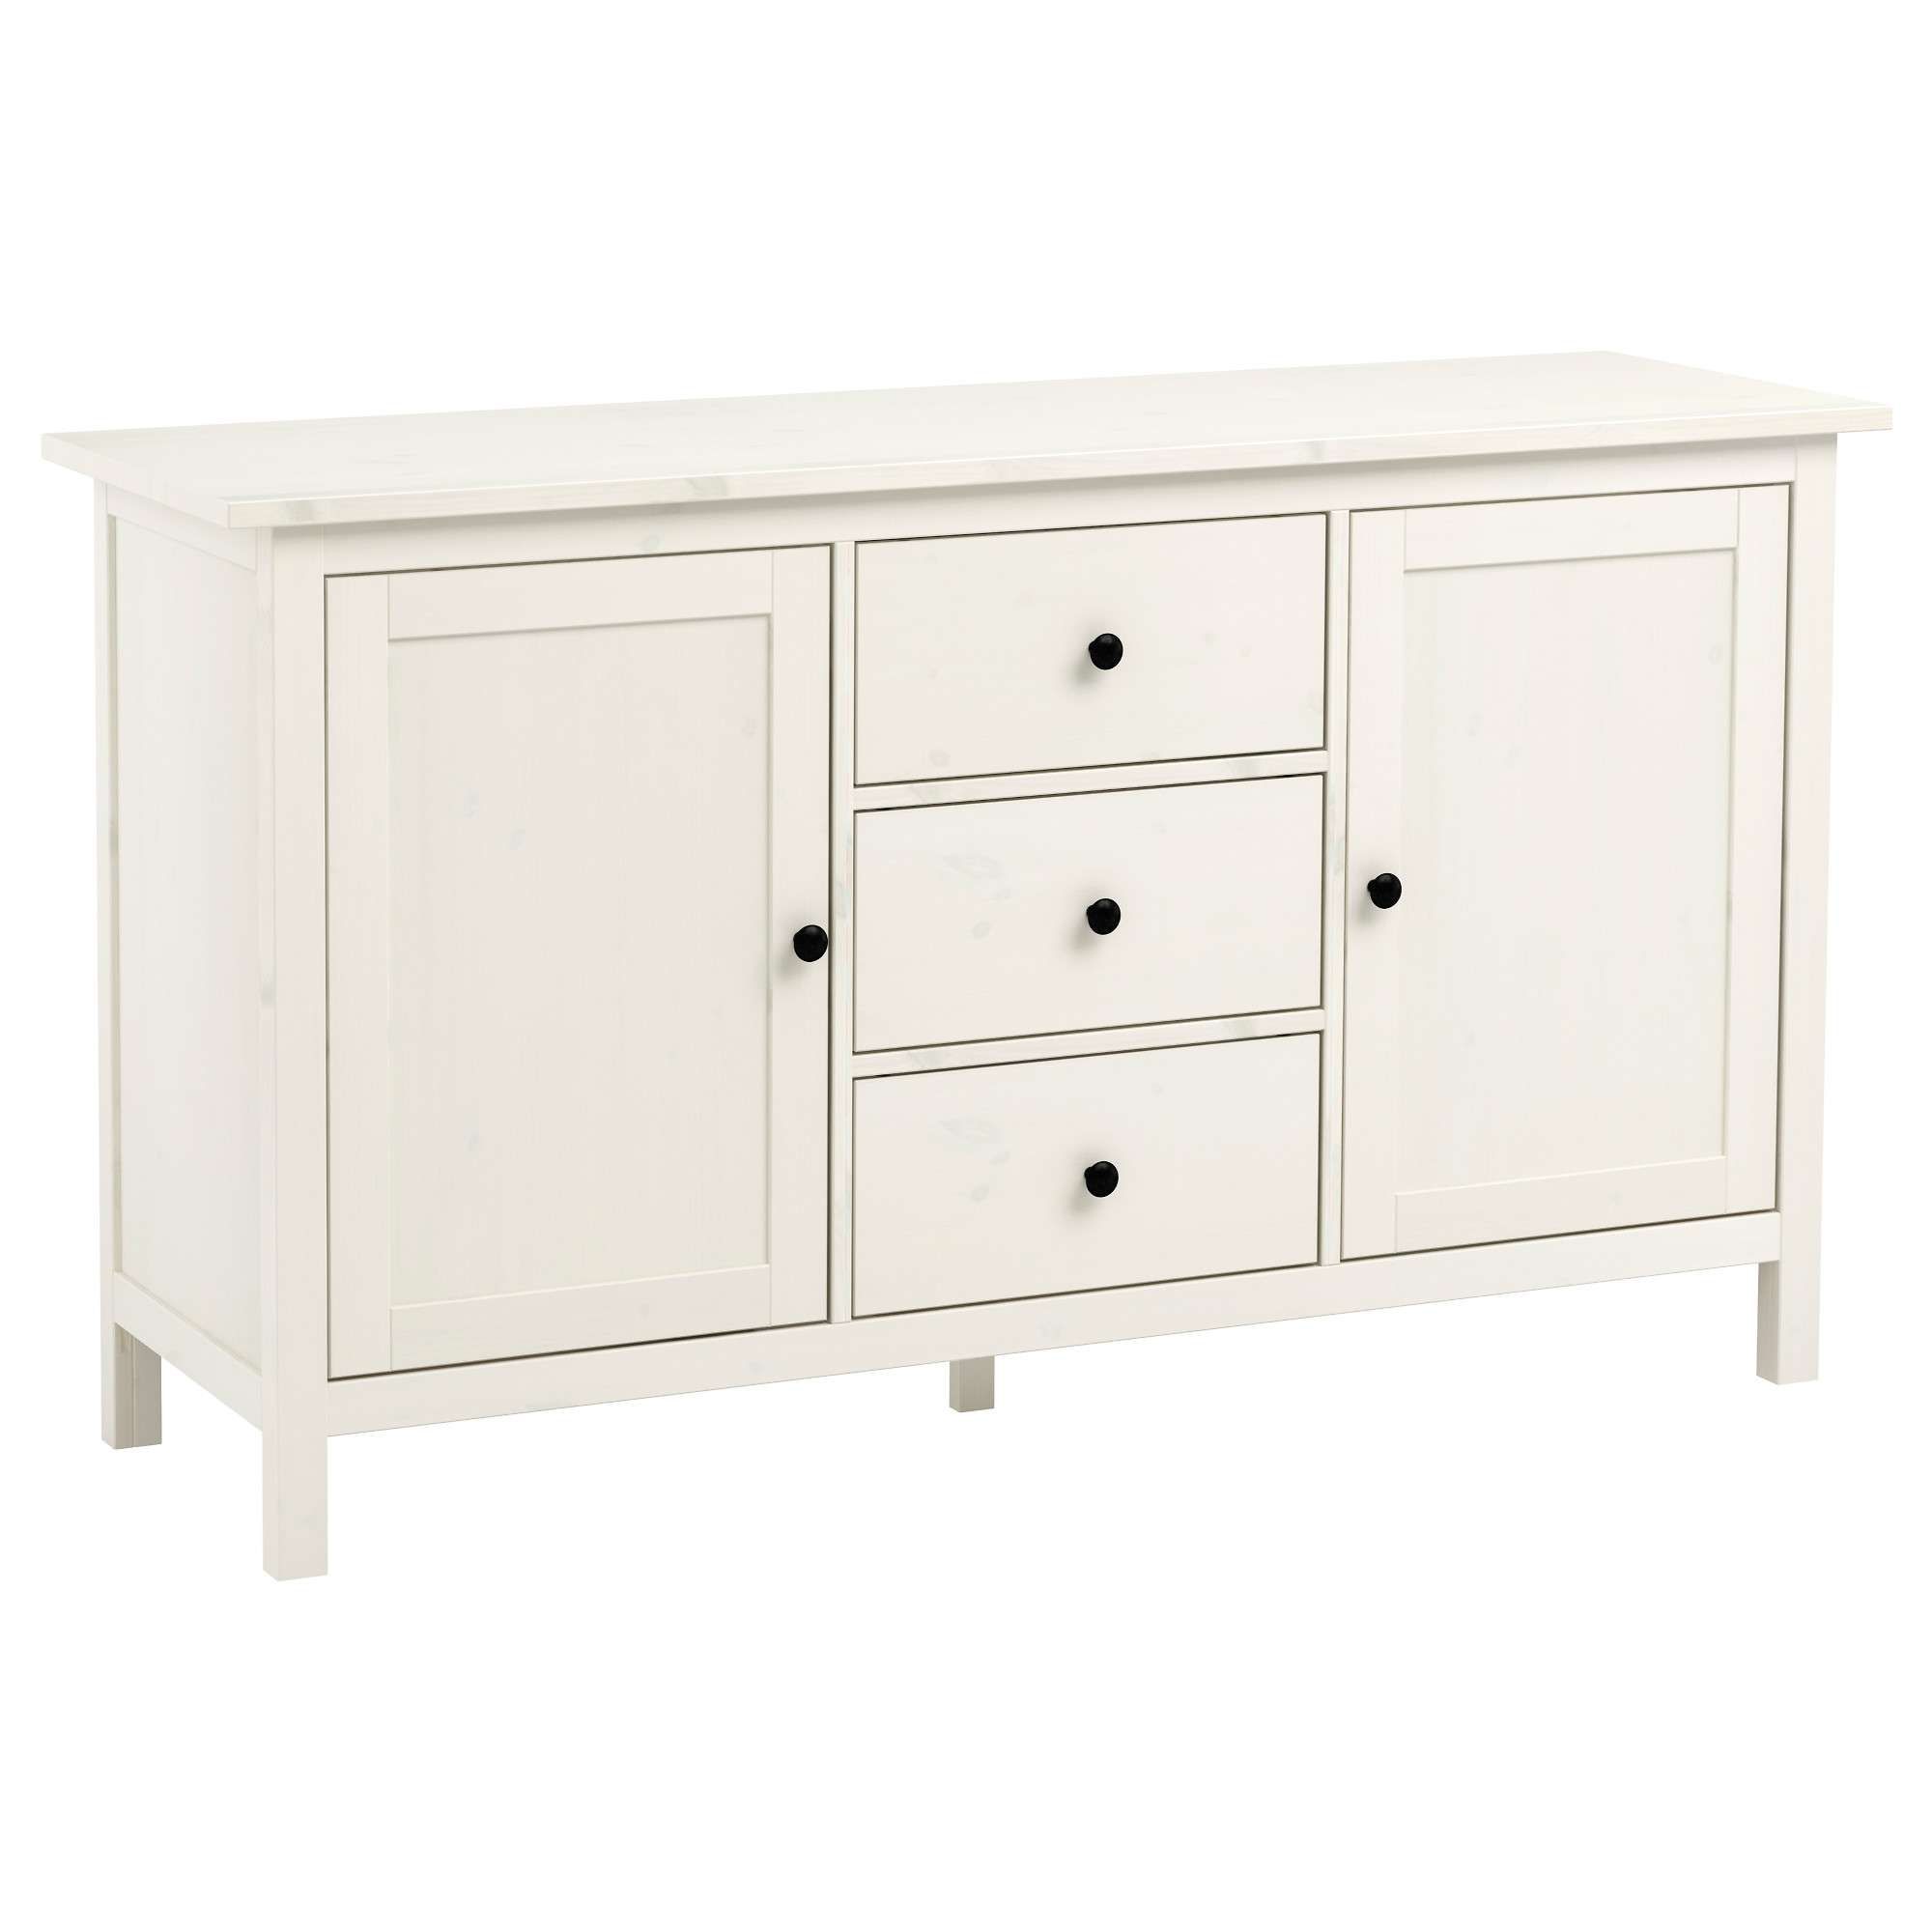 Hemnes Sideboard – White Stain – Ikea In Long Thin Sideboards (View 14 of 20)